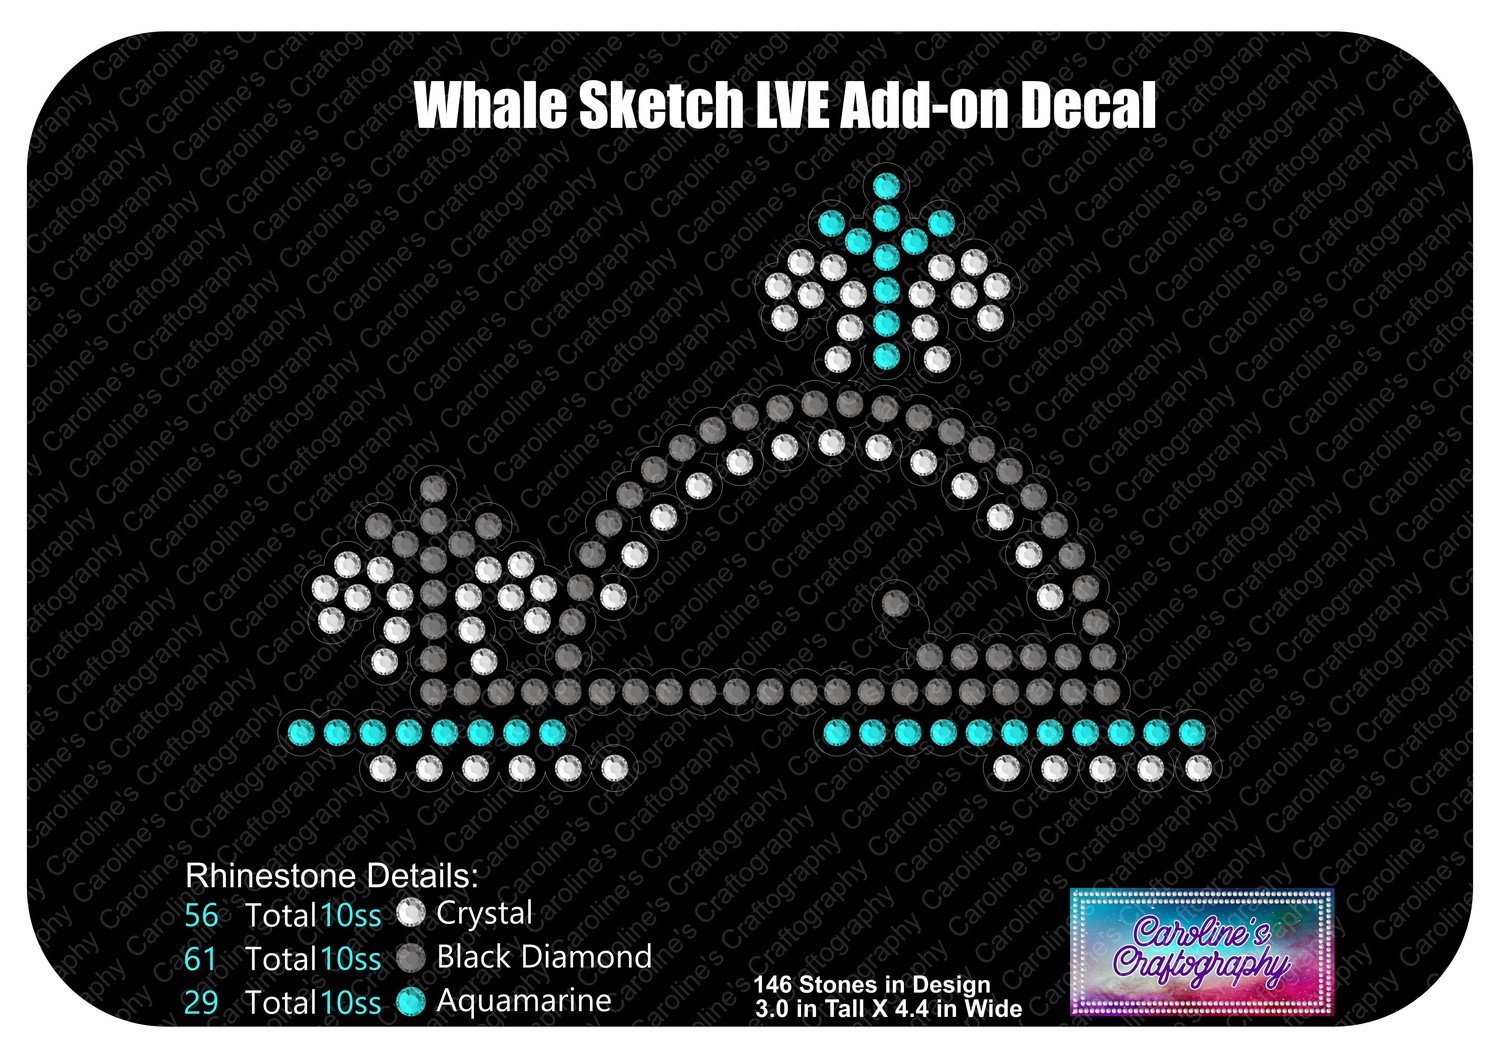 Whale Sketch LVE Add-on Decal Stone